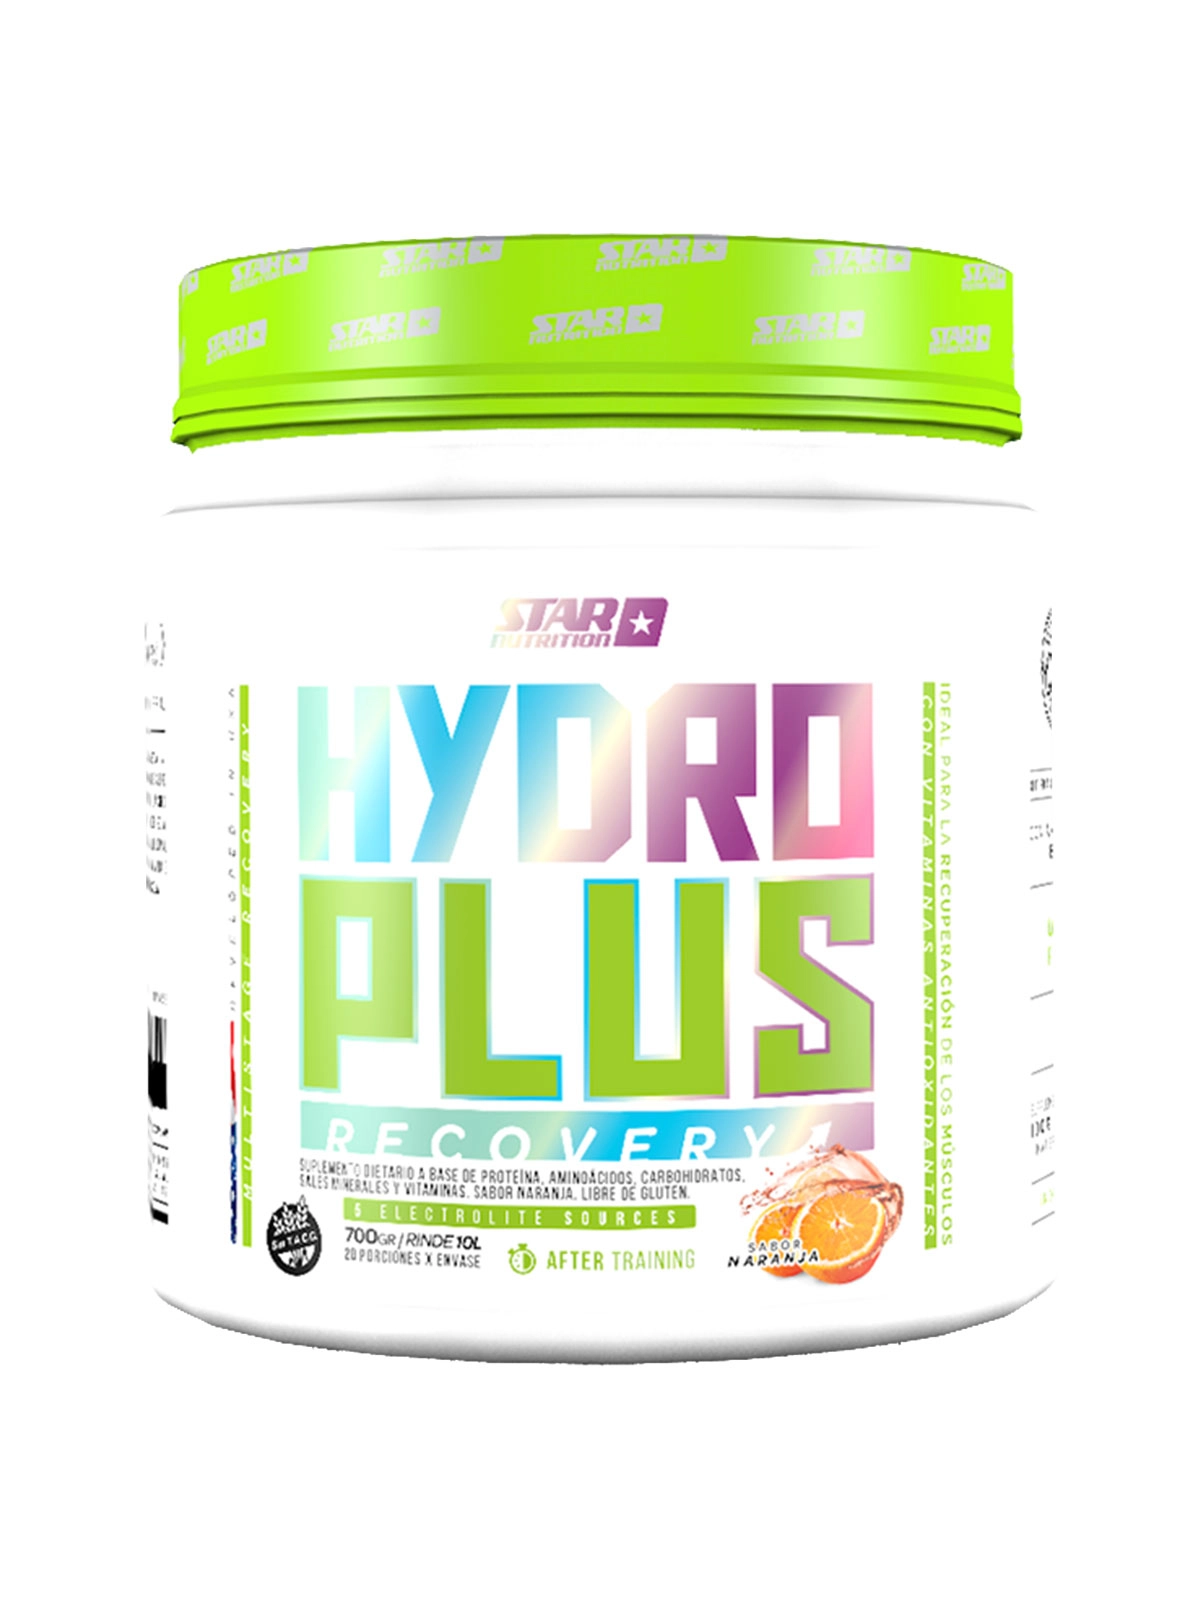 HYDROPLUS RECOVERY